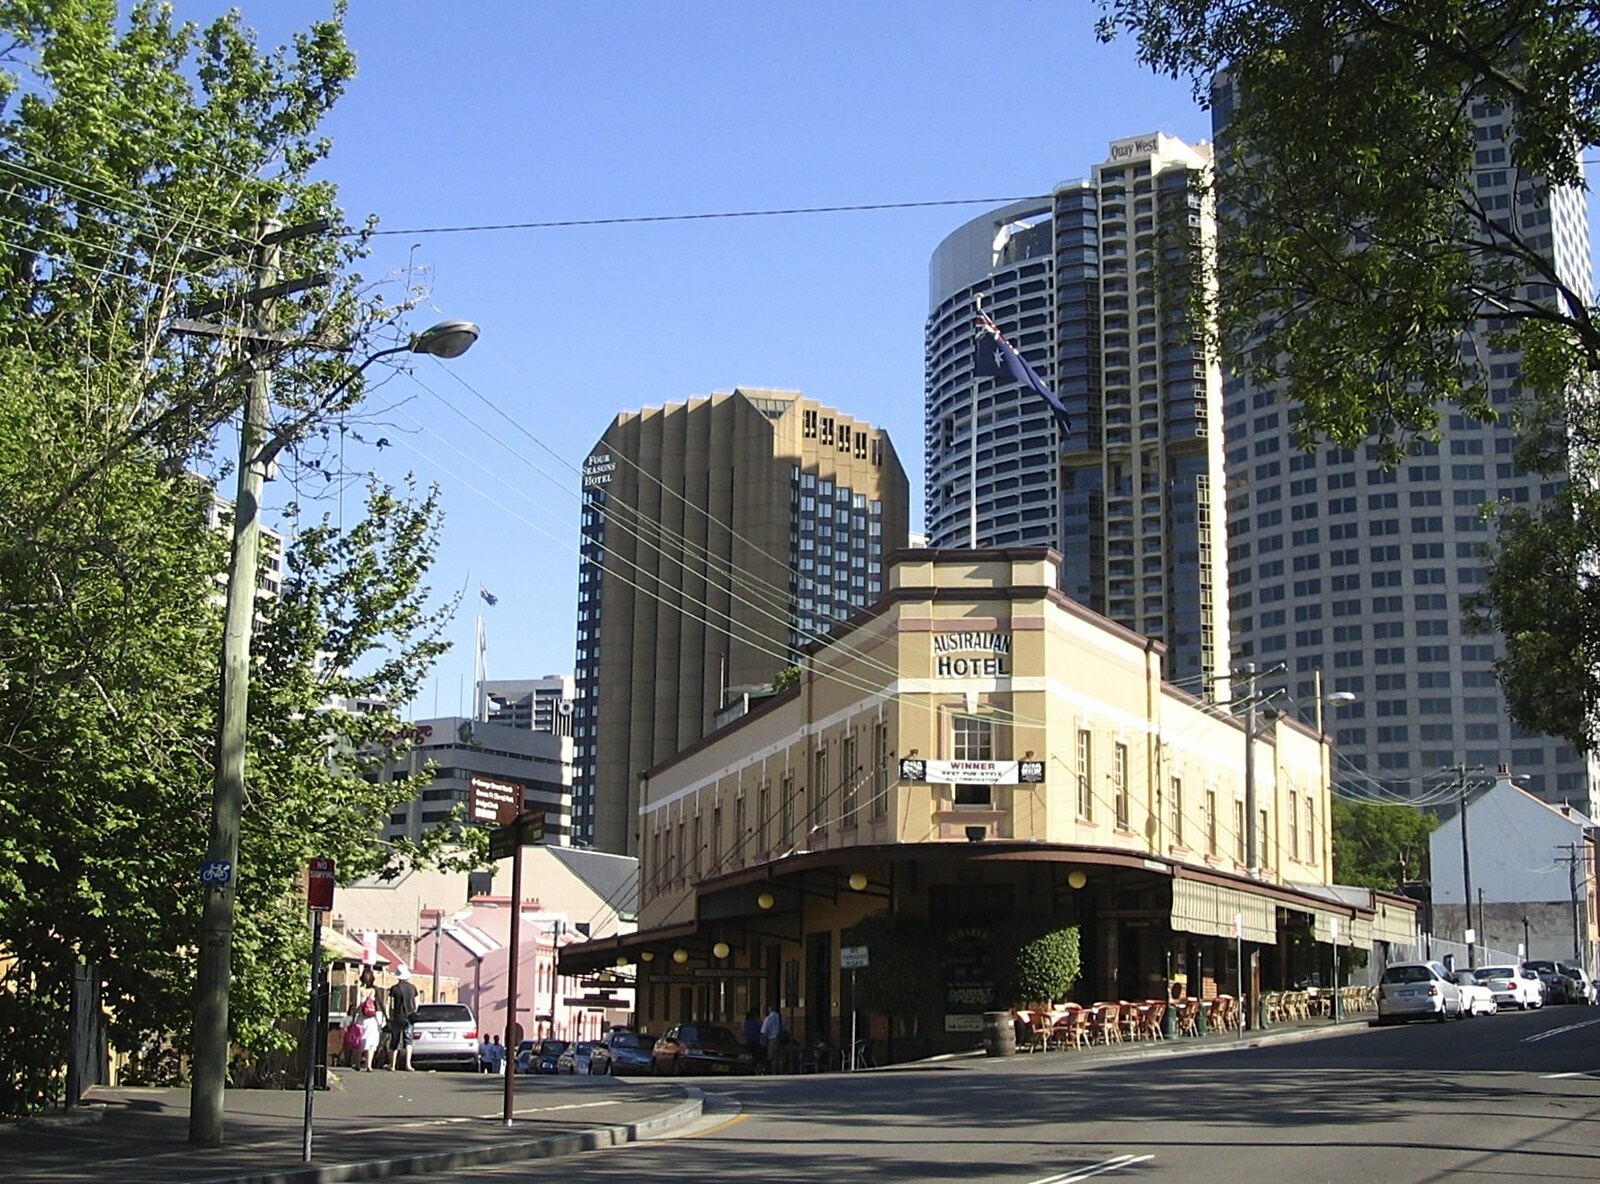 The Australian Hotel from Sydney, New South Wales, Australia - 10th October 2004